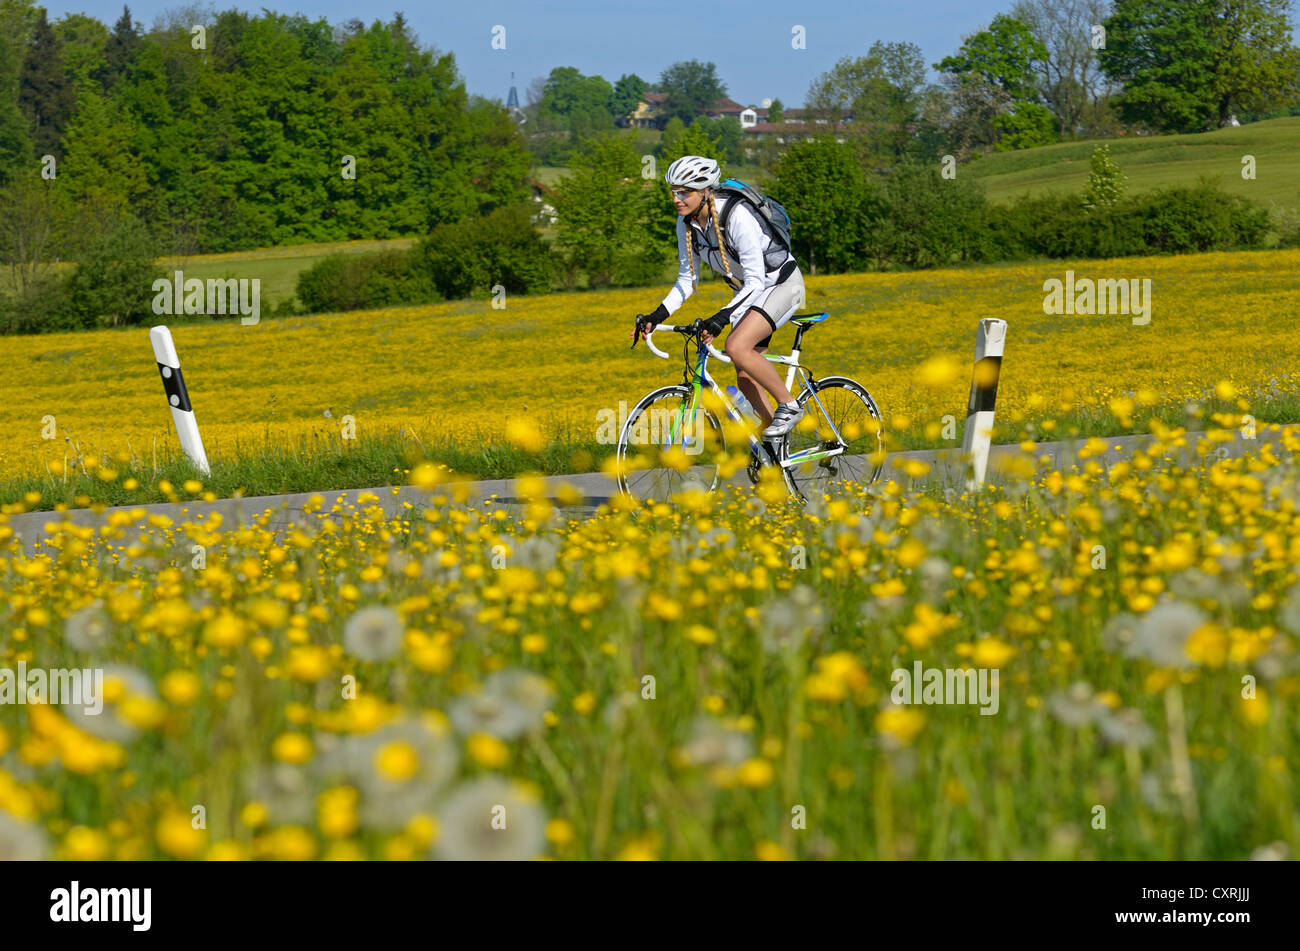 Young woman on a racing bicycle, Upper Bavaria, Bavaria, Germany, Europe Stock Photo